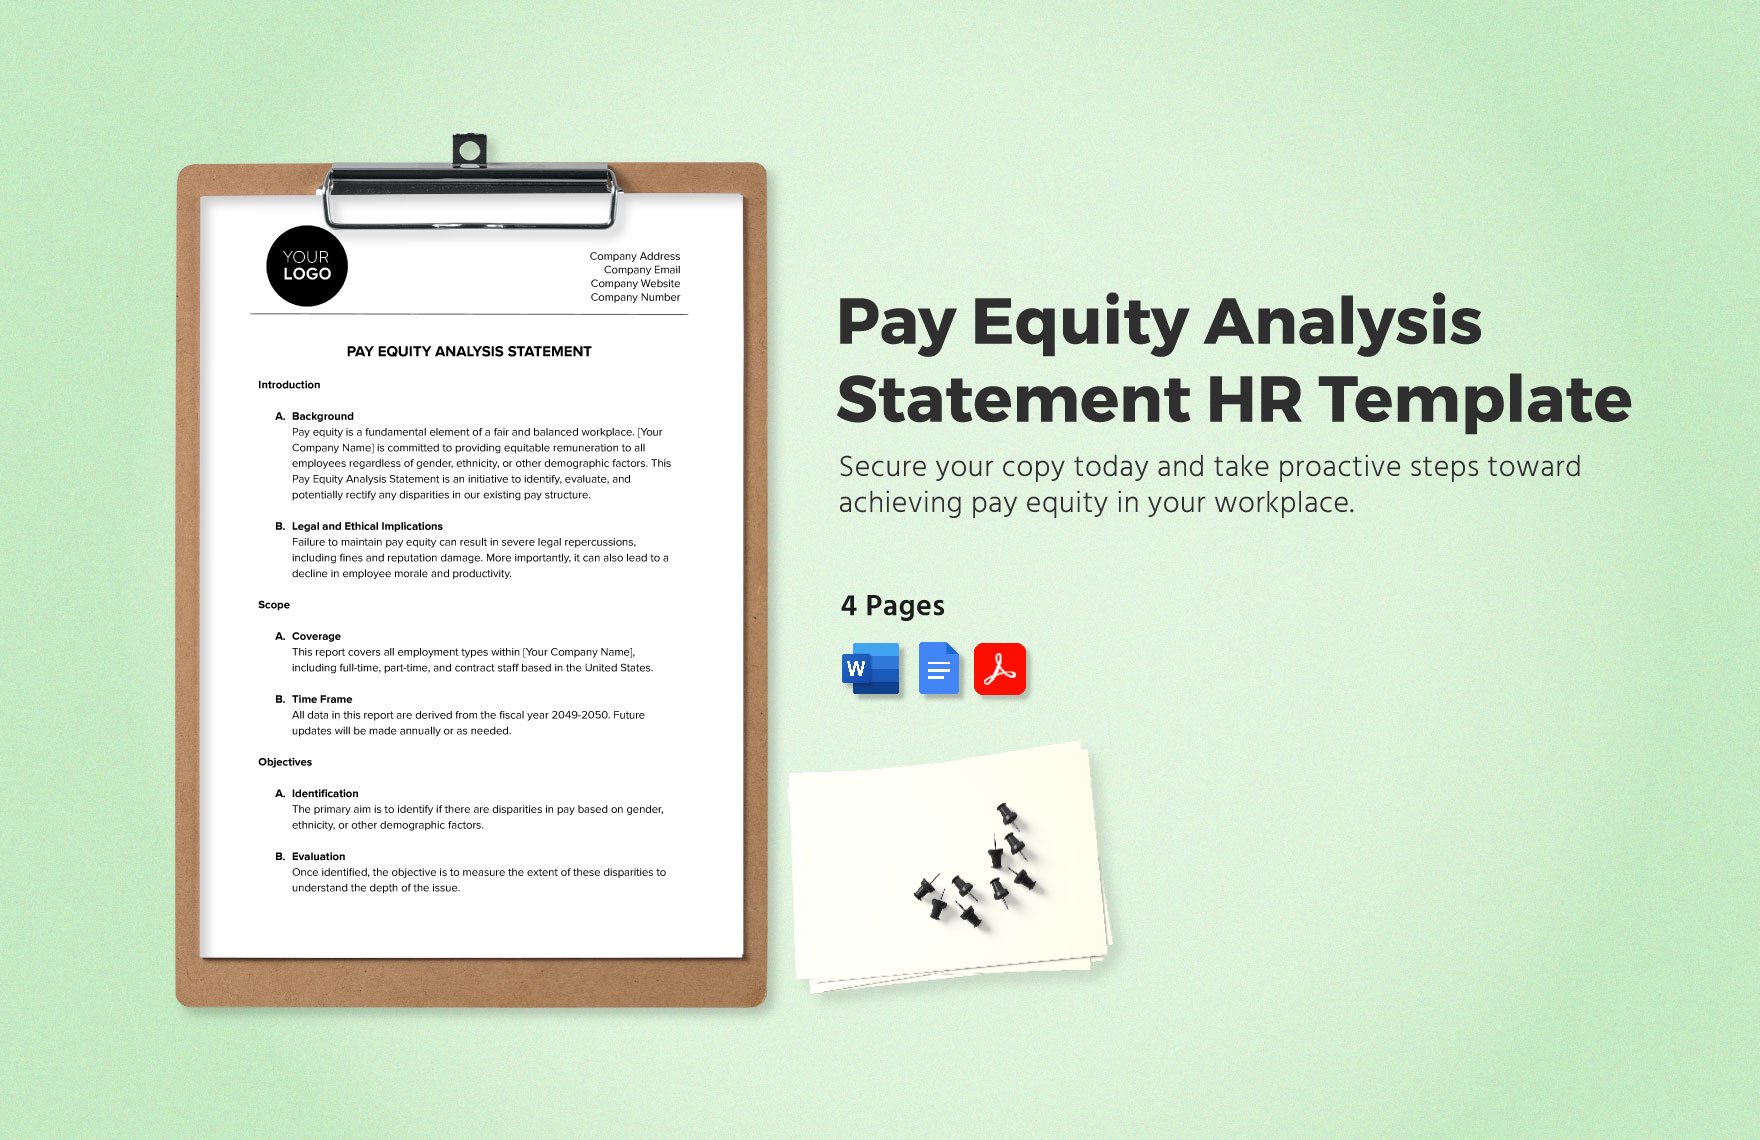 Pay Equity Analysis Statement HR Template